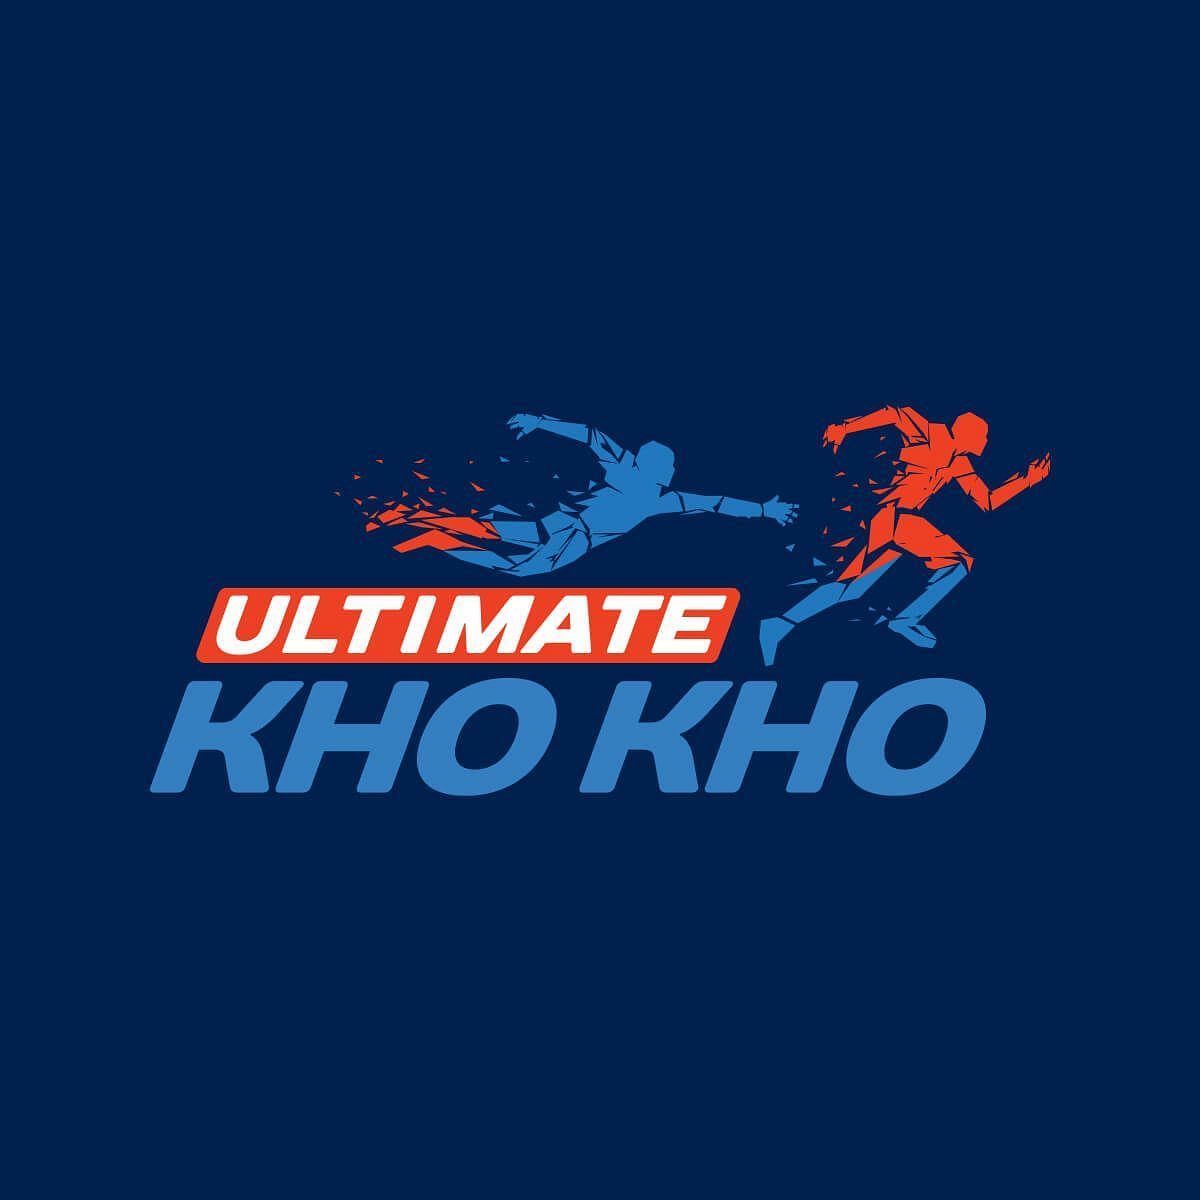 The kho kho fraternity is all geared up for a sporting revolution. (Image Courtesy: ultimatekhokho.com)